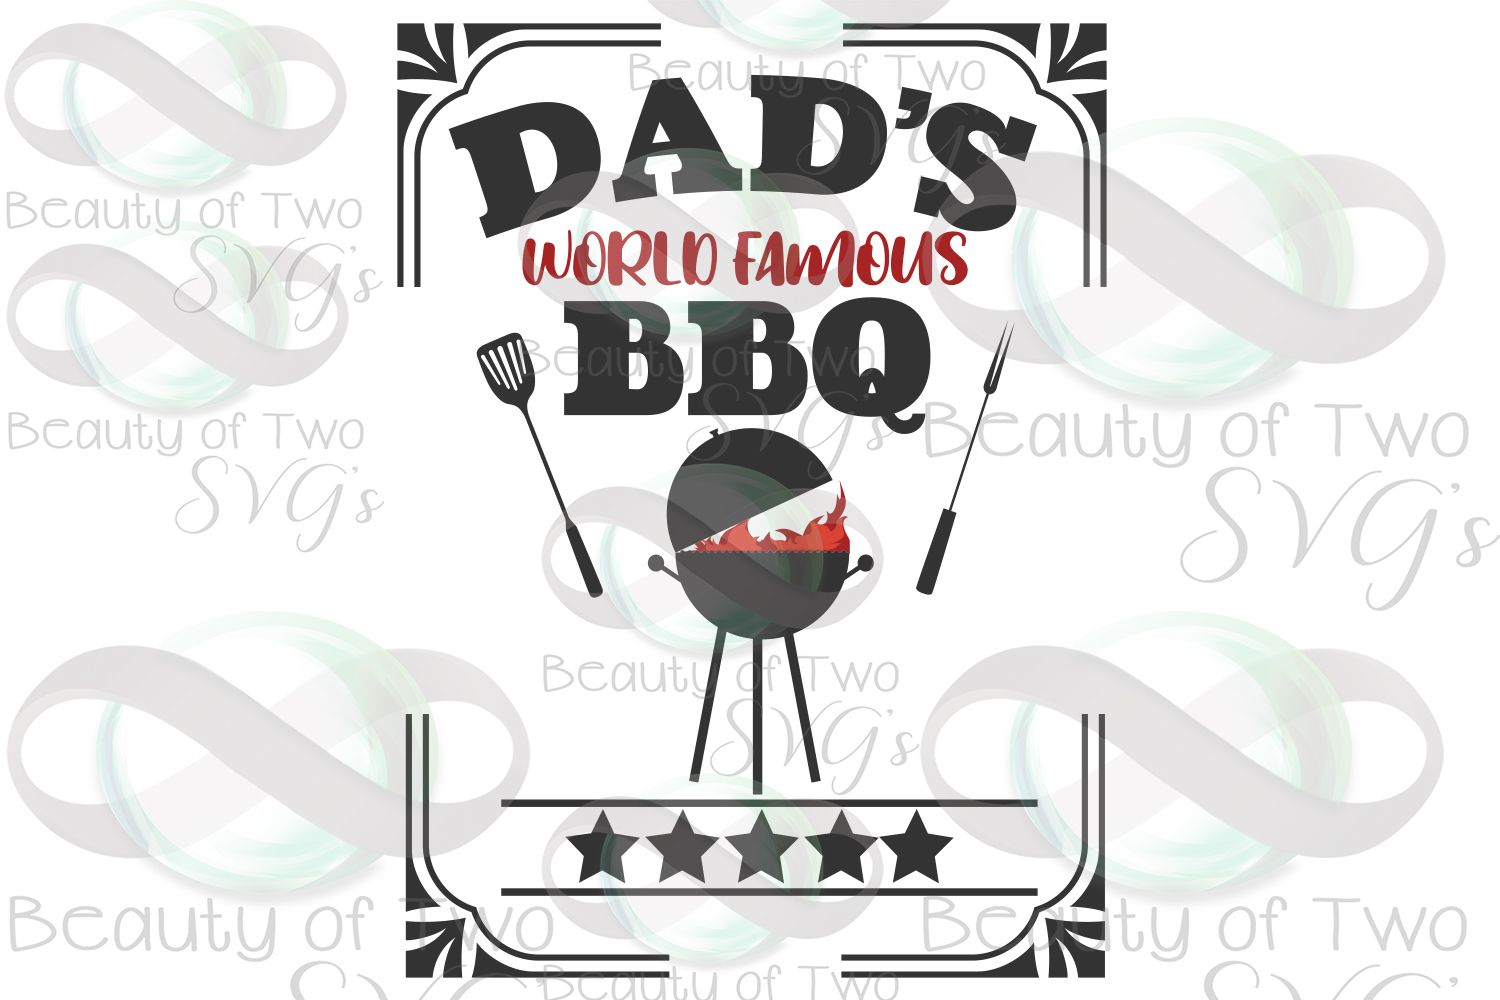 Download Fathers Day Dad Grill svg & png, Dad's World Famous BBQ svg,